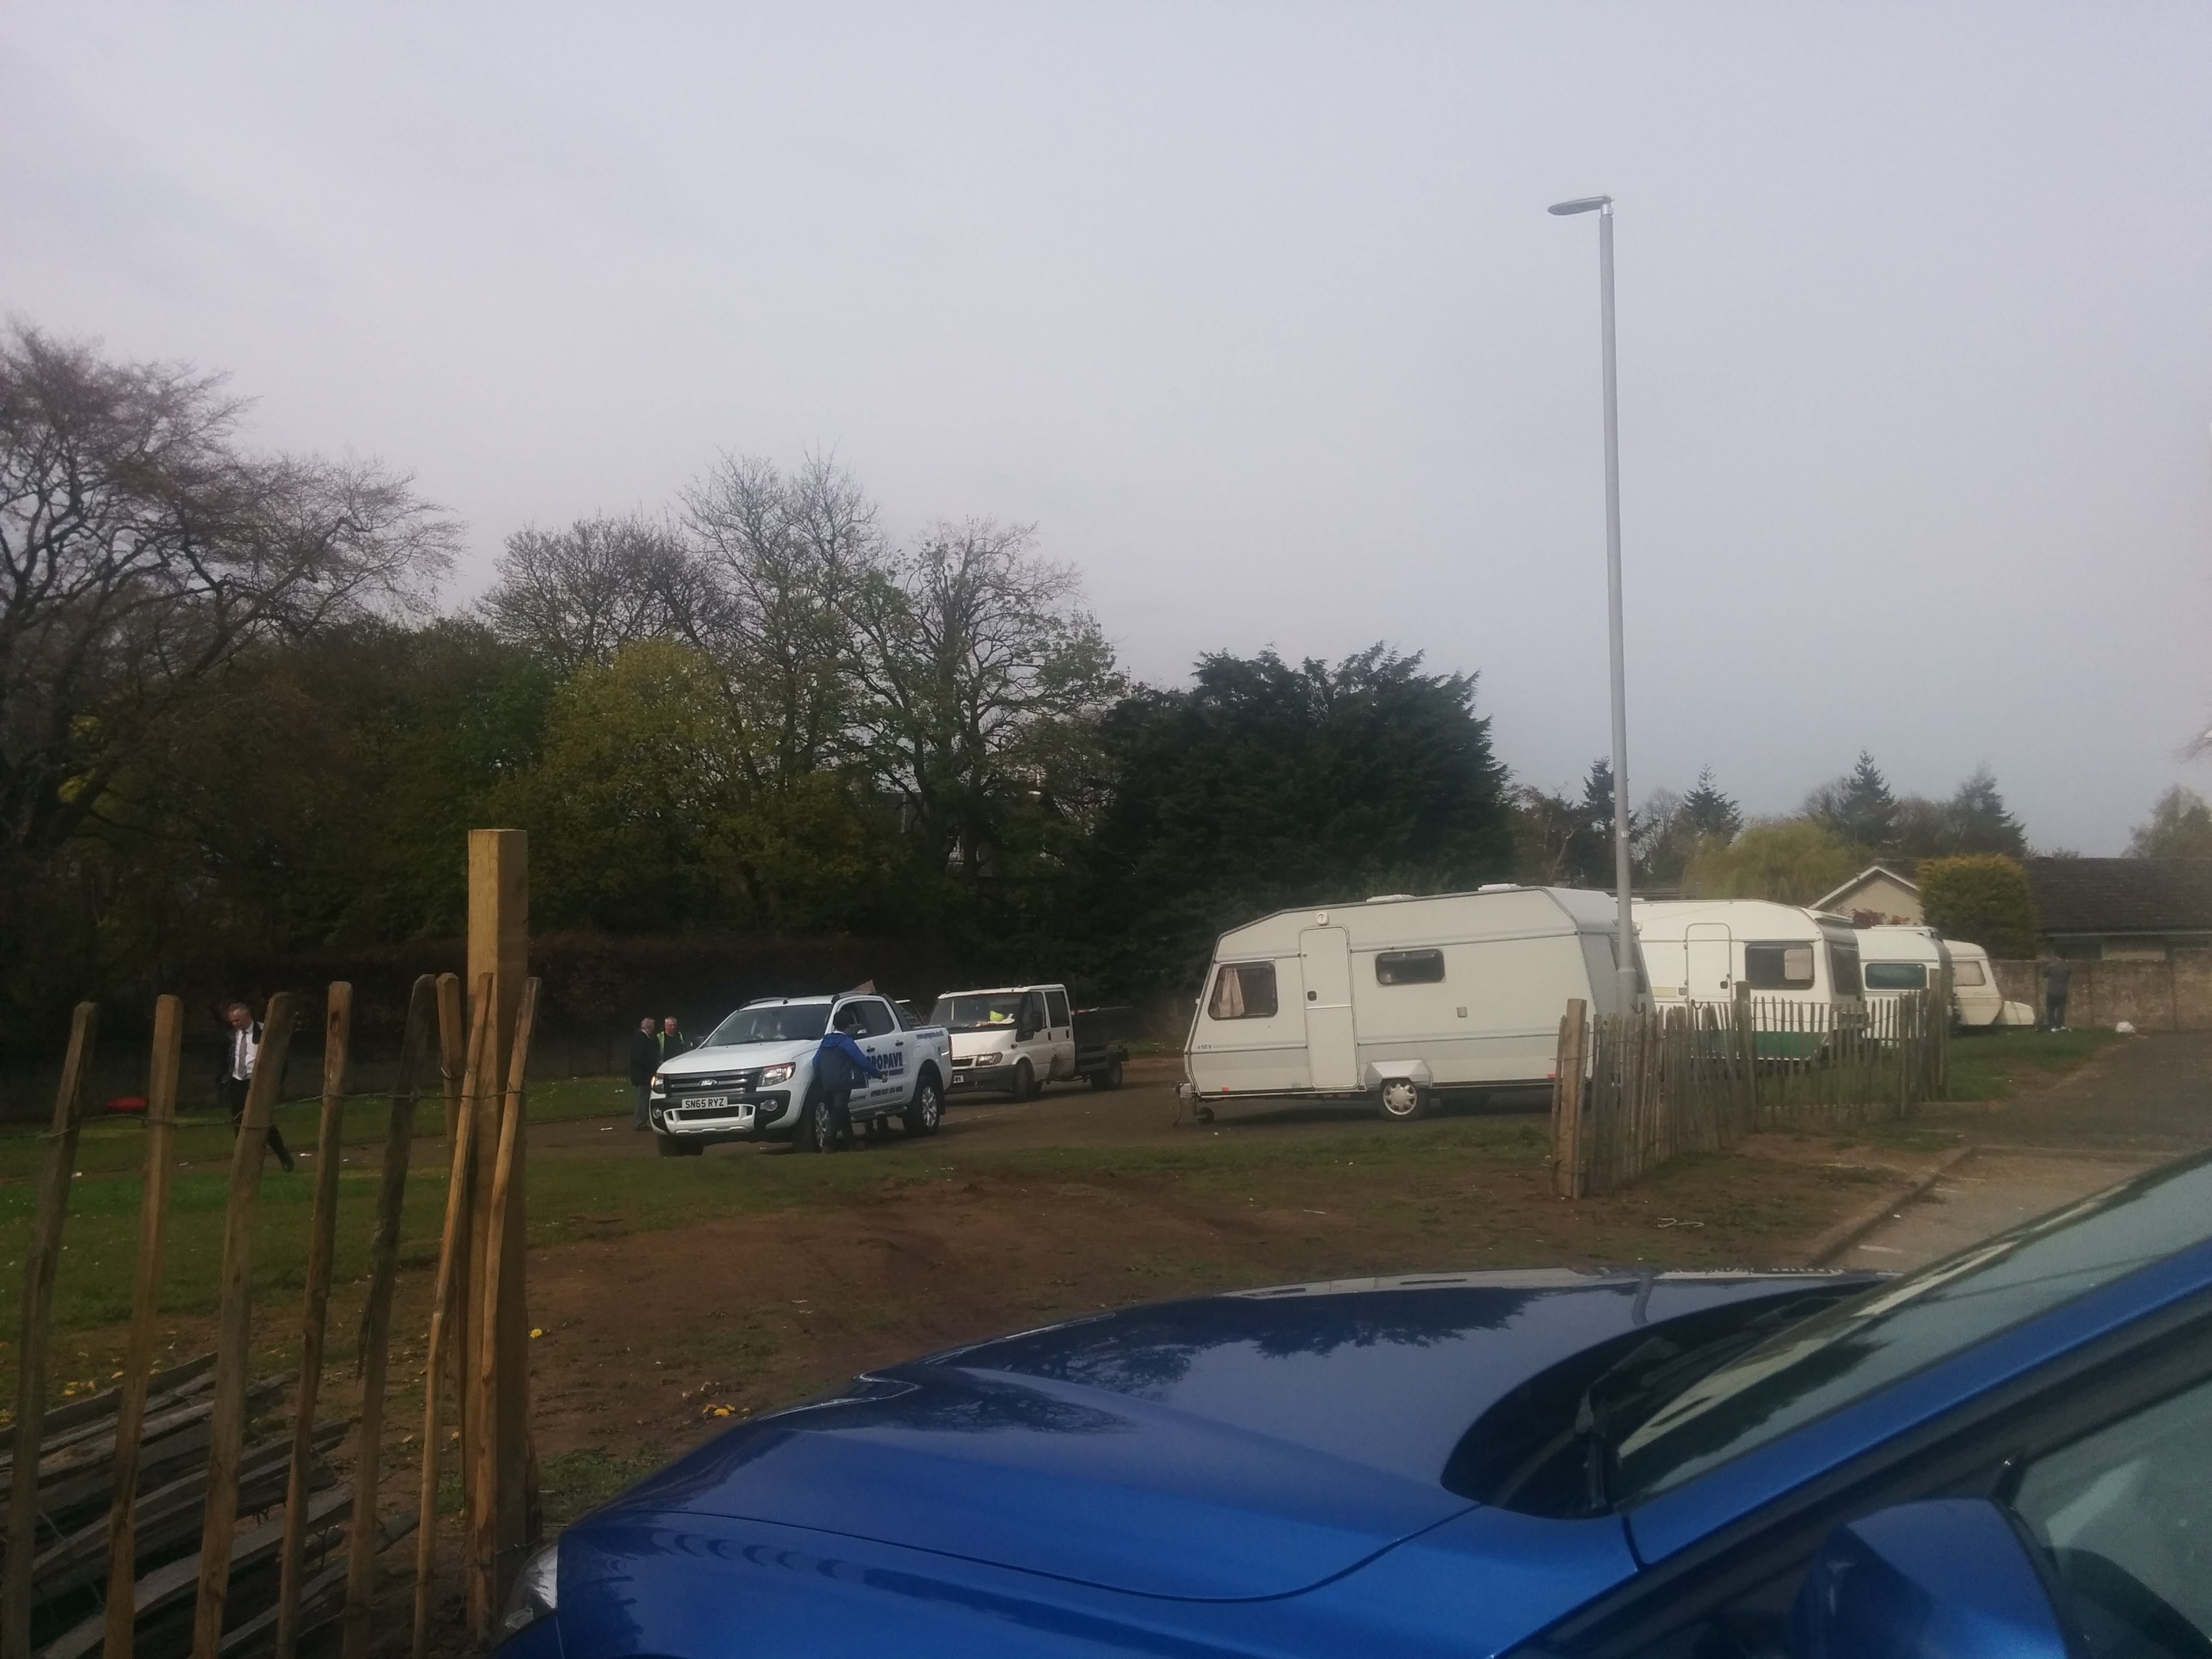 The few remaining caravans at Thereewells.